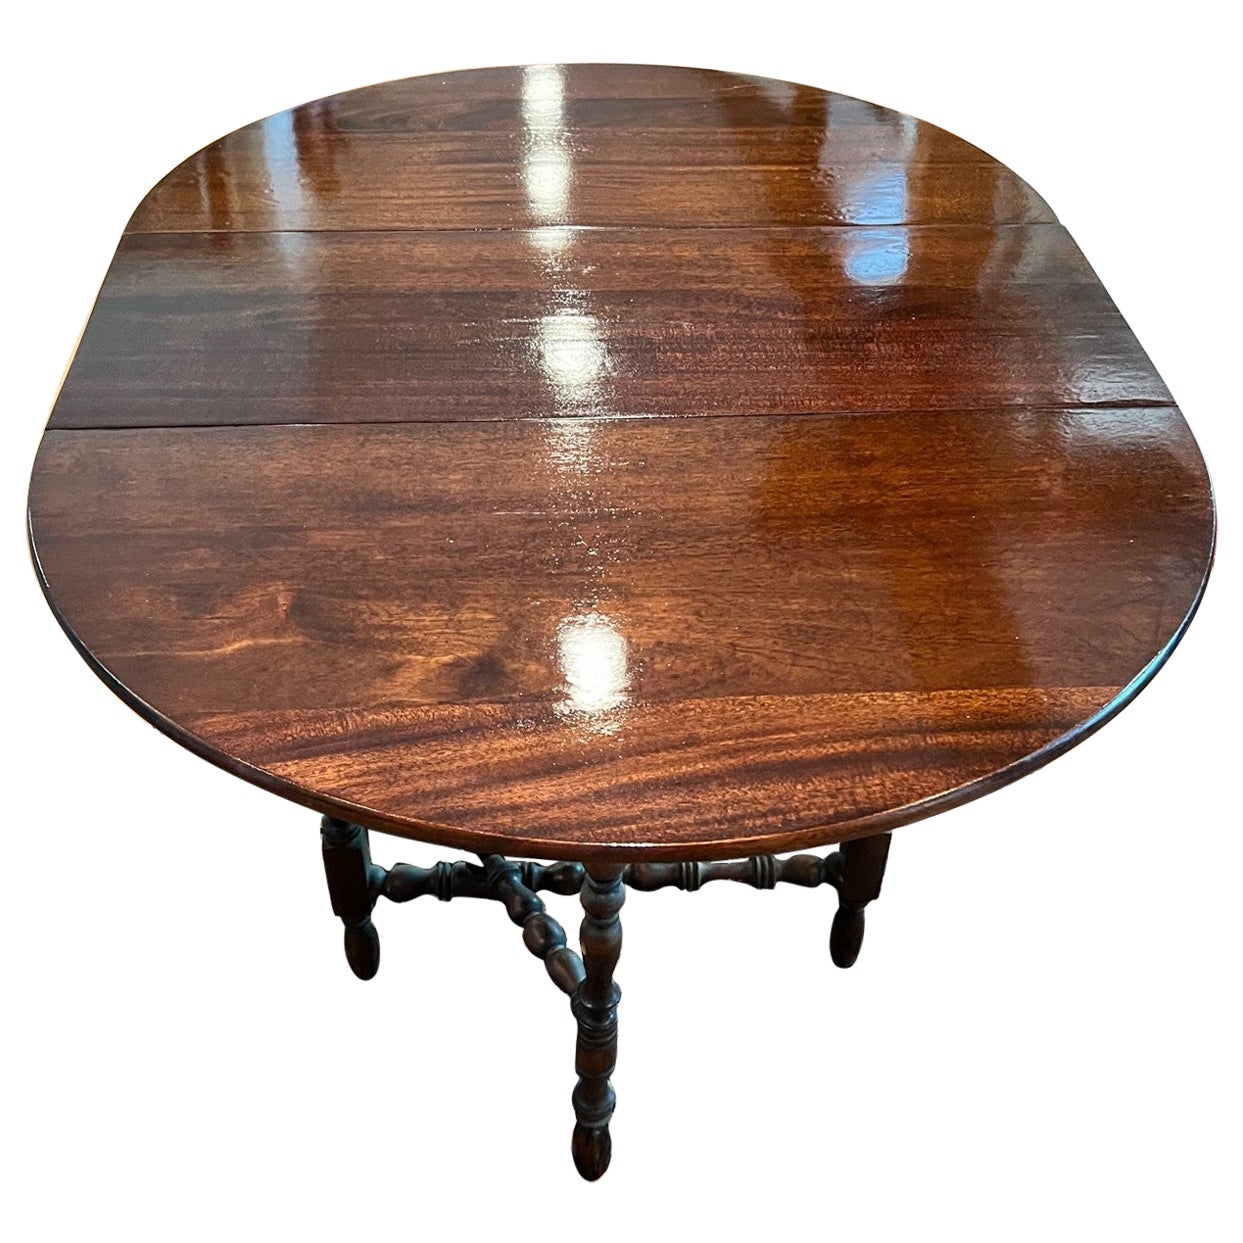 Antique Mahogany Oval Victorian Sunderland/Folding Table with Turned Legs For Sale